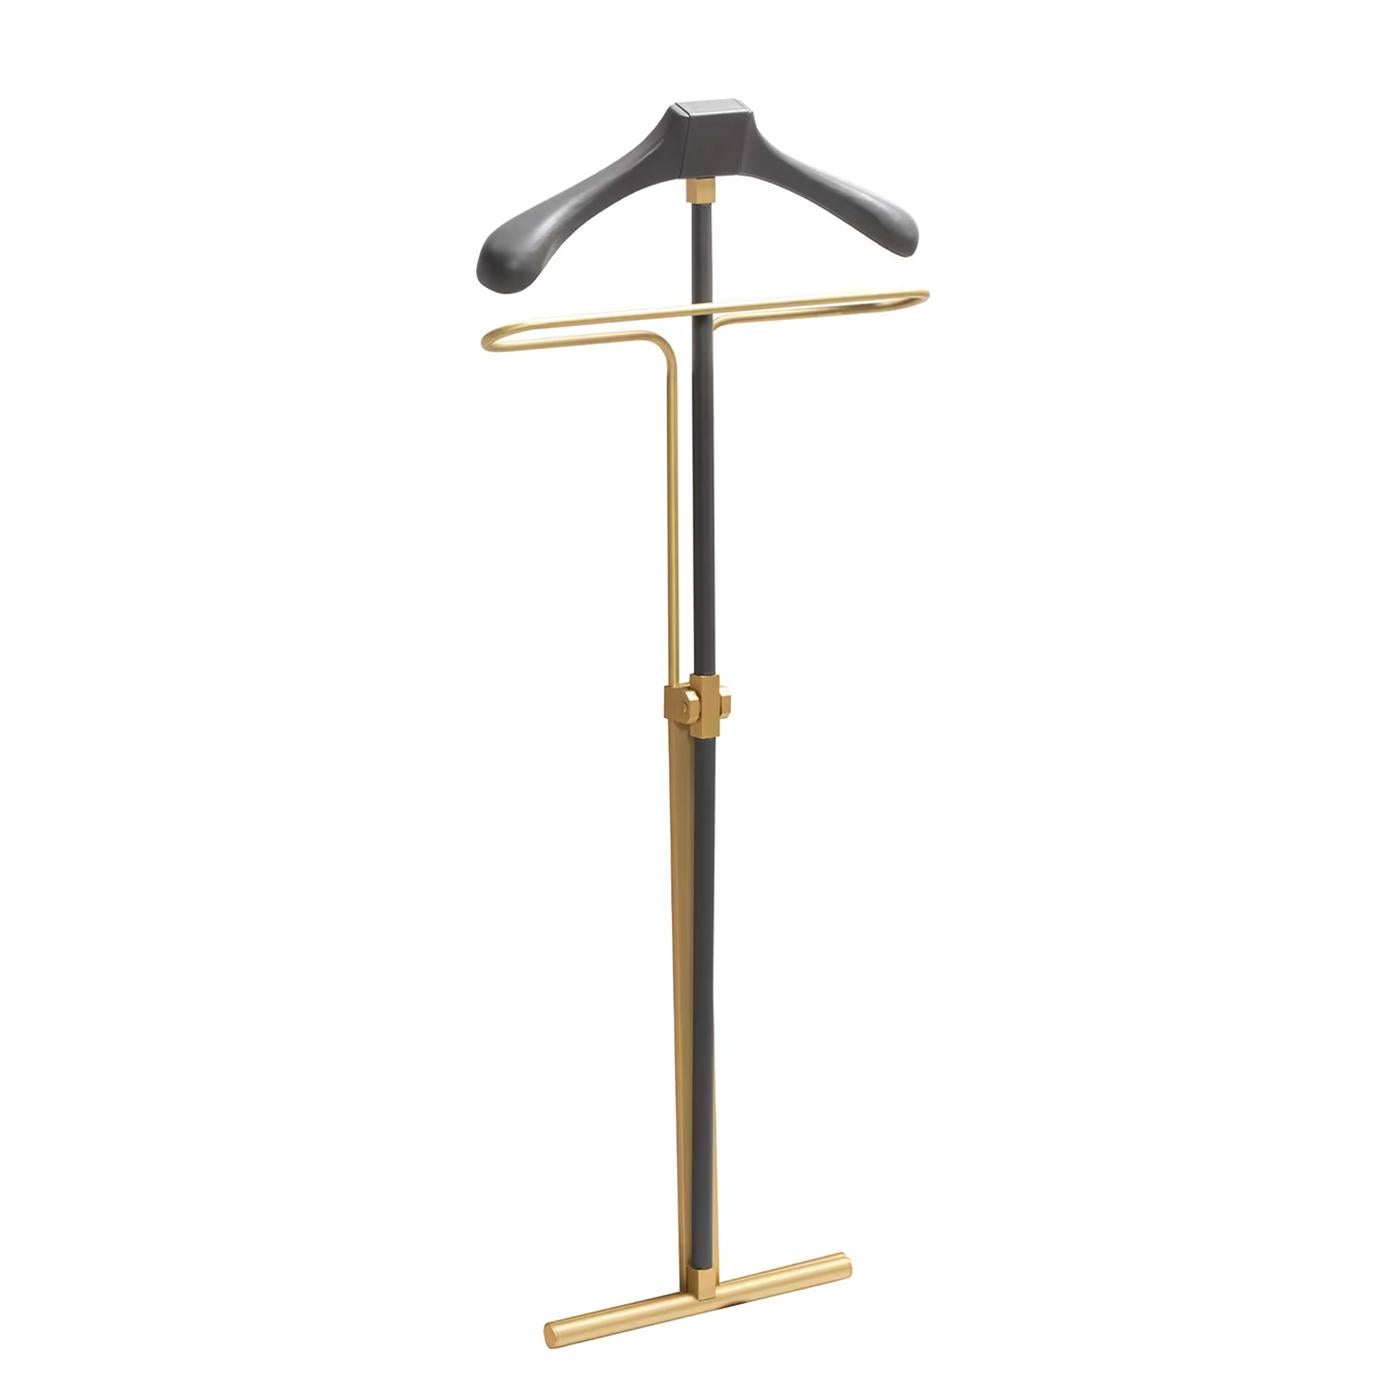 Valet Barell Folding with structure in solid brass in matte finish
and in bronzed finish, coatrack covered with italian genuine leather 
in sober grey color.
Also available with structure in solid brass in chrome finish and covered 
with italian